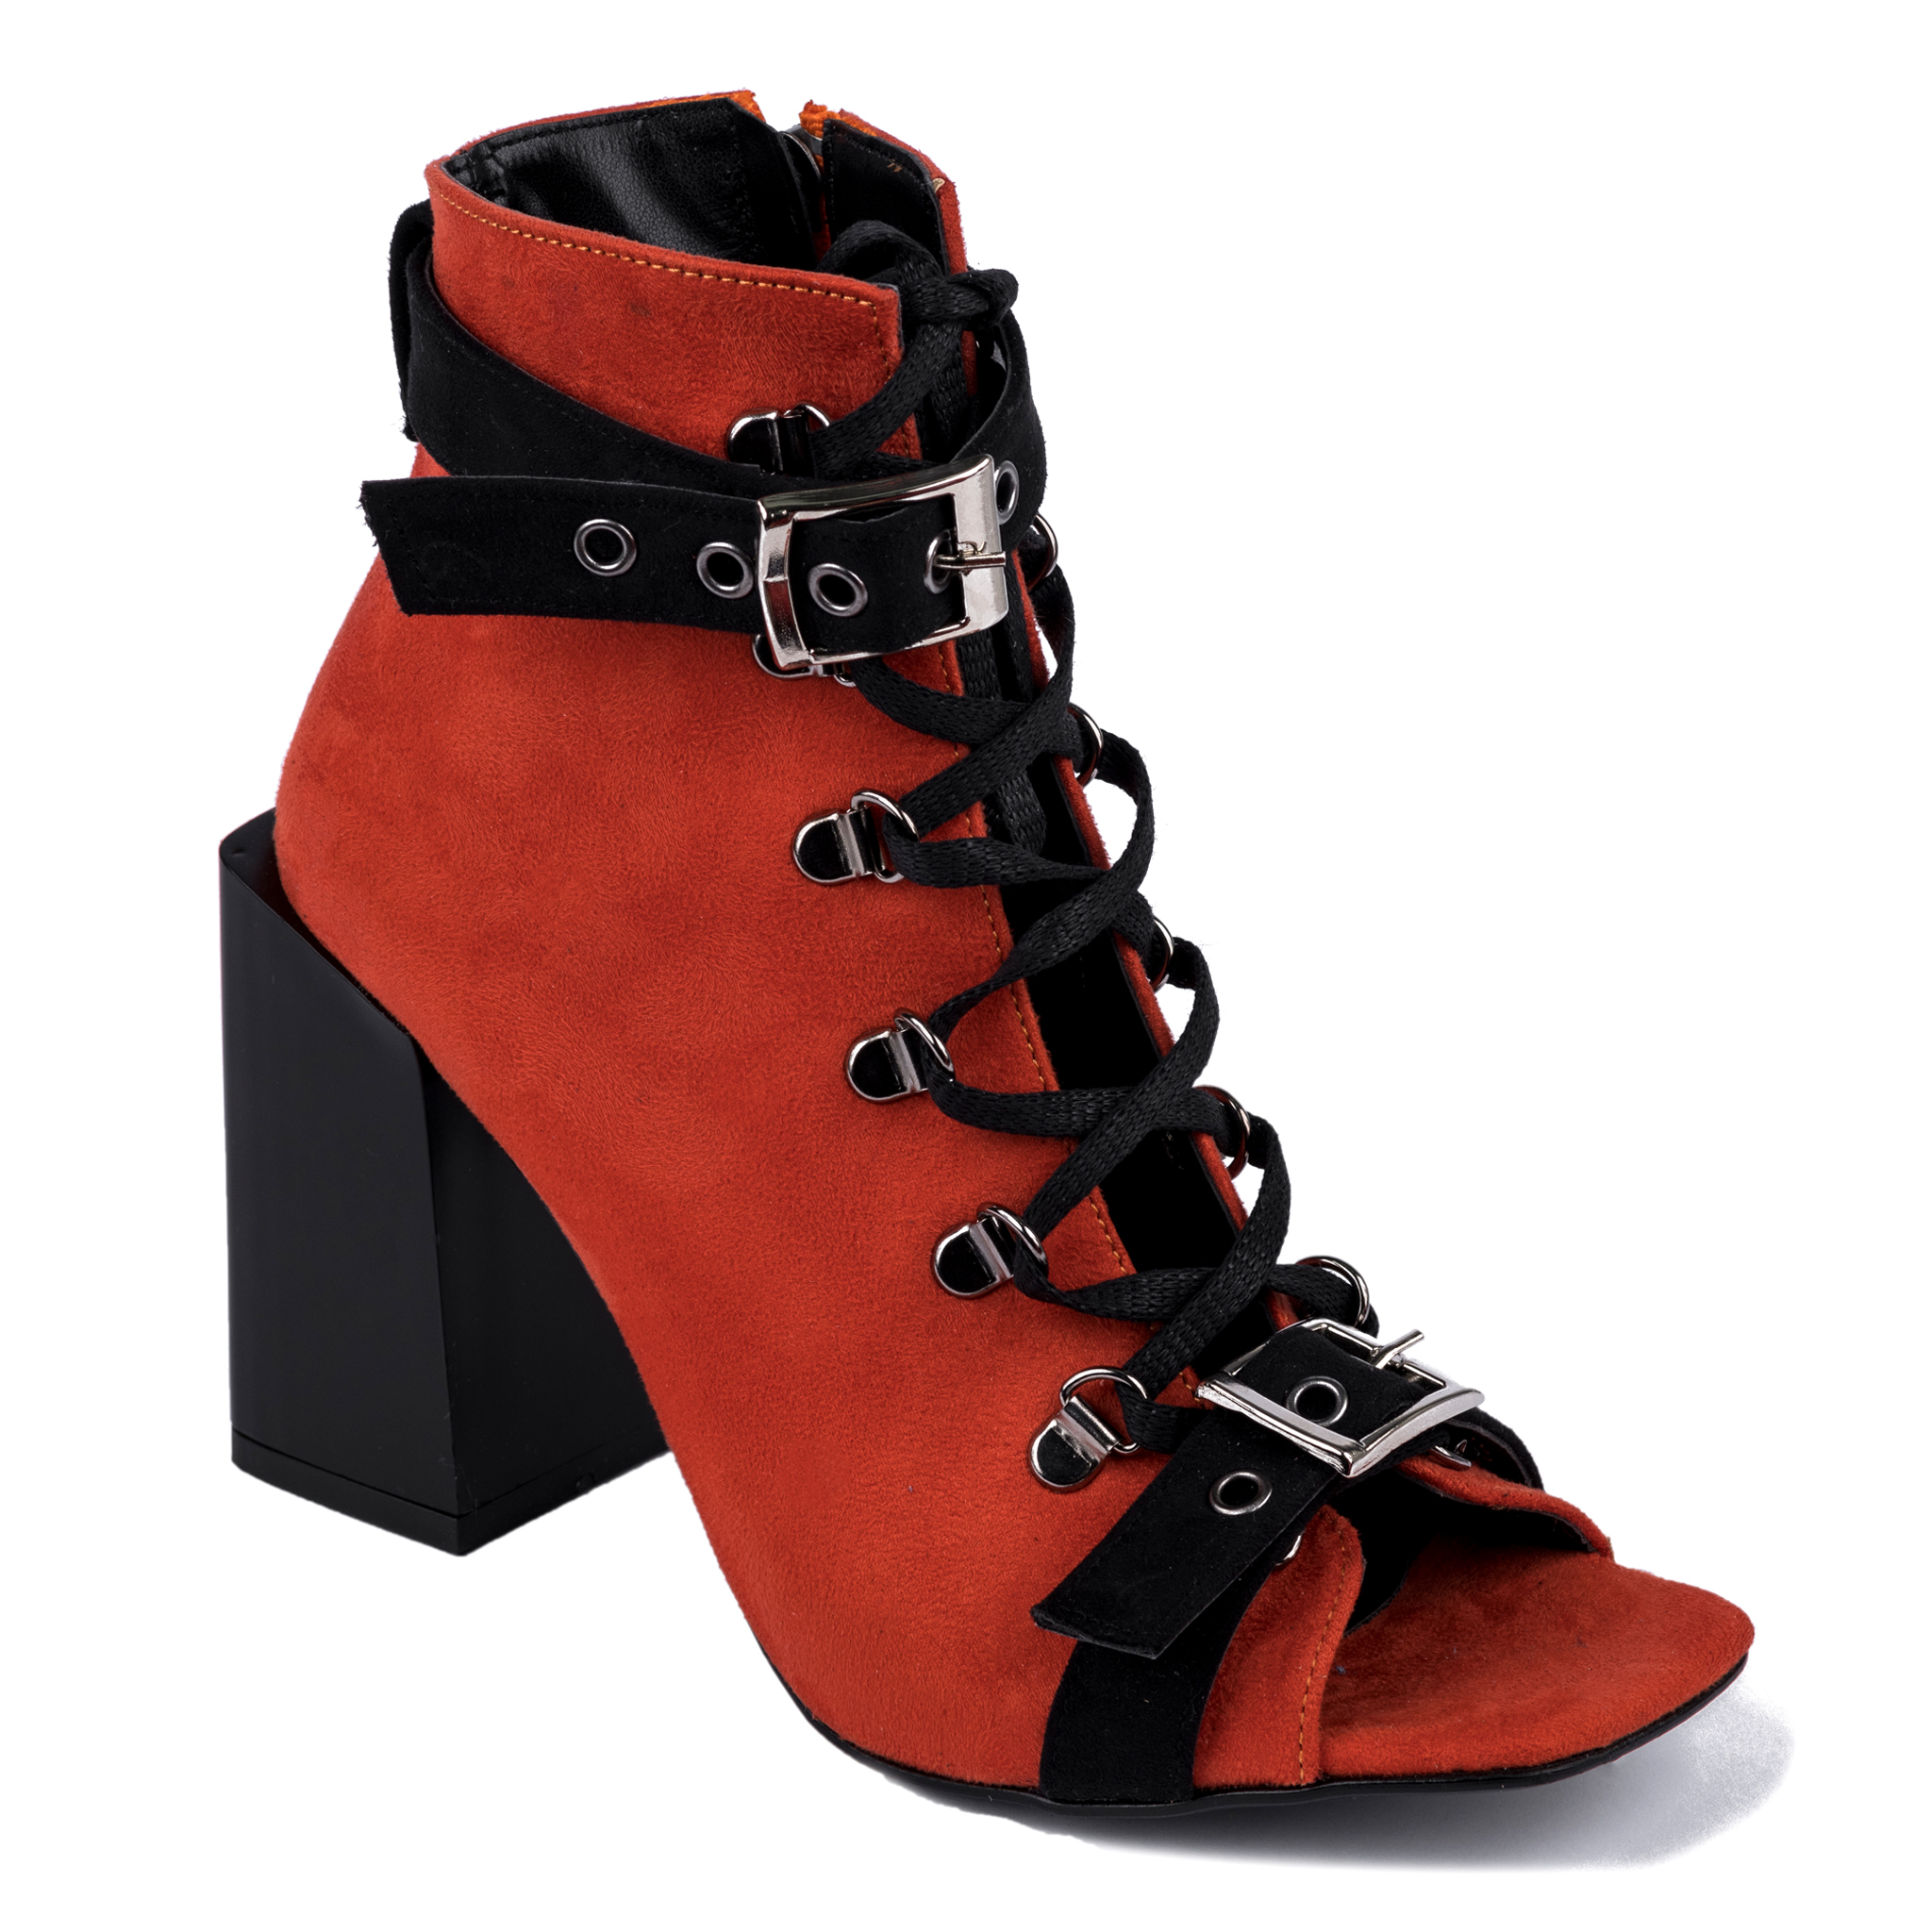 VELOUR PEEP TOE  ANKLE BOOTS WITH BELTS AND BLOCK HEEL - ORANGE